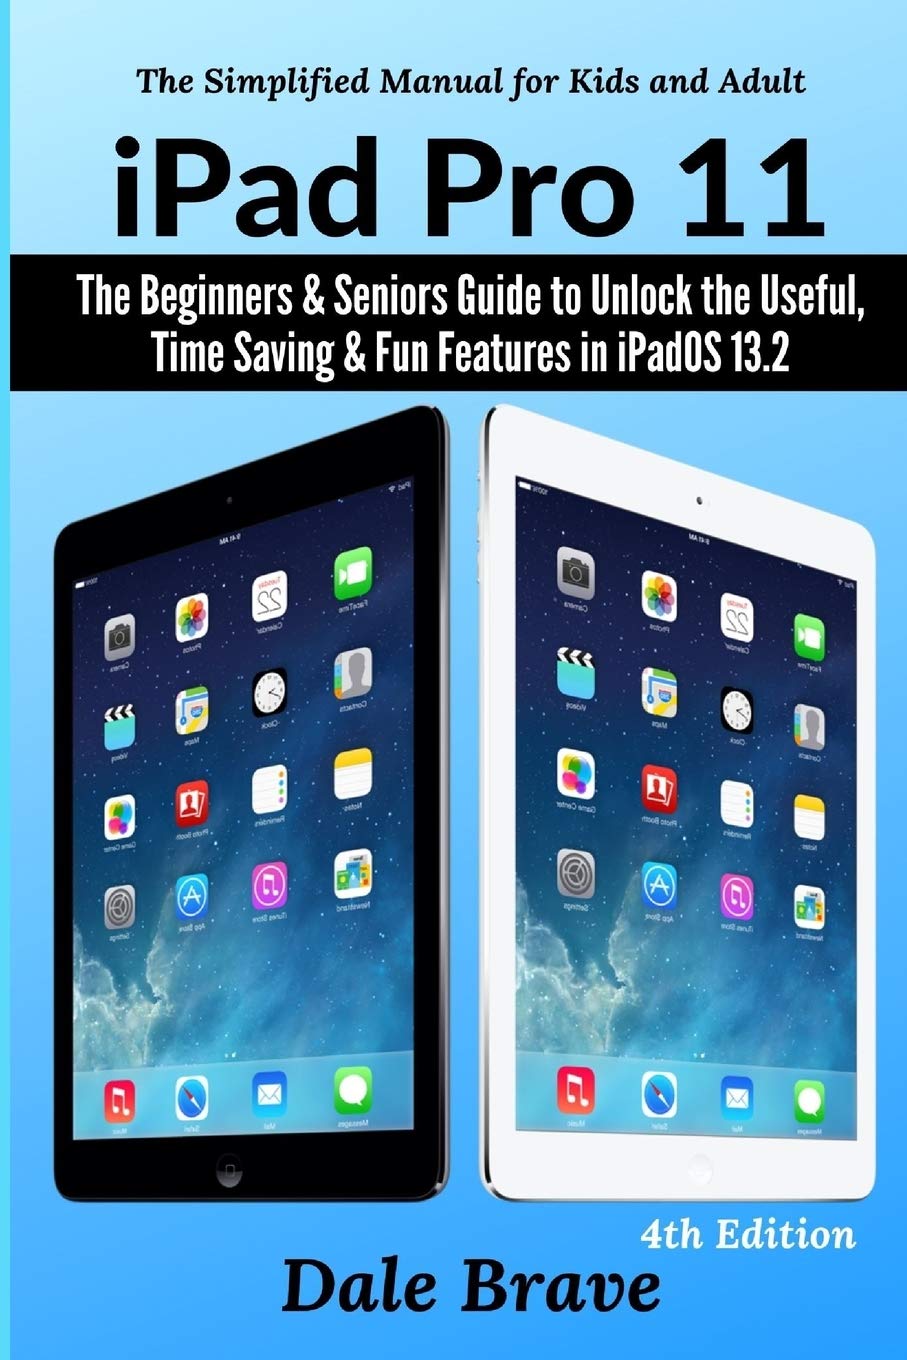 iPad Pro 11: The Beginners & Seniors Guide to Unlock the Useful, Time Saving & Fun Features in iPadOS 13.2 (The Simplified Manual for Kids and Adults)